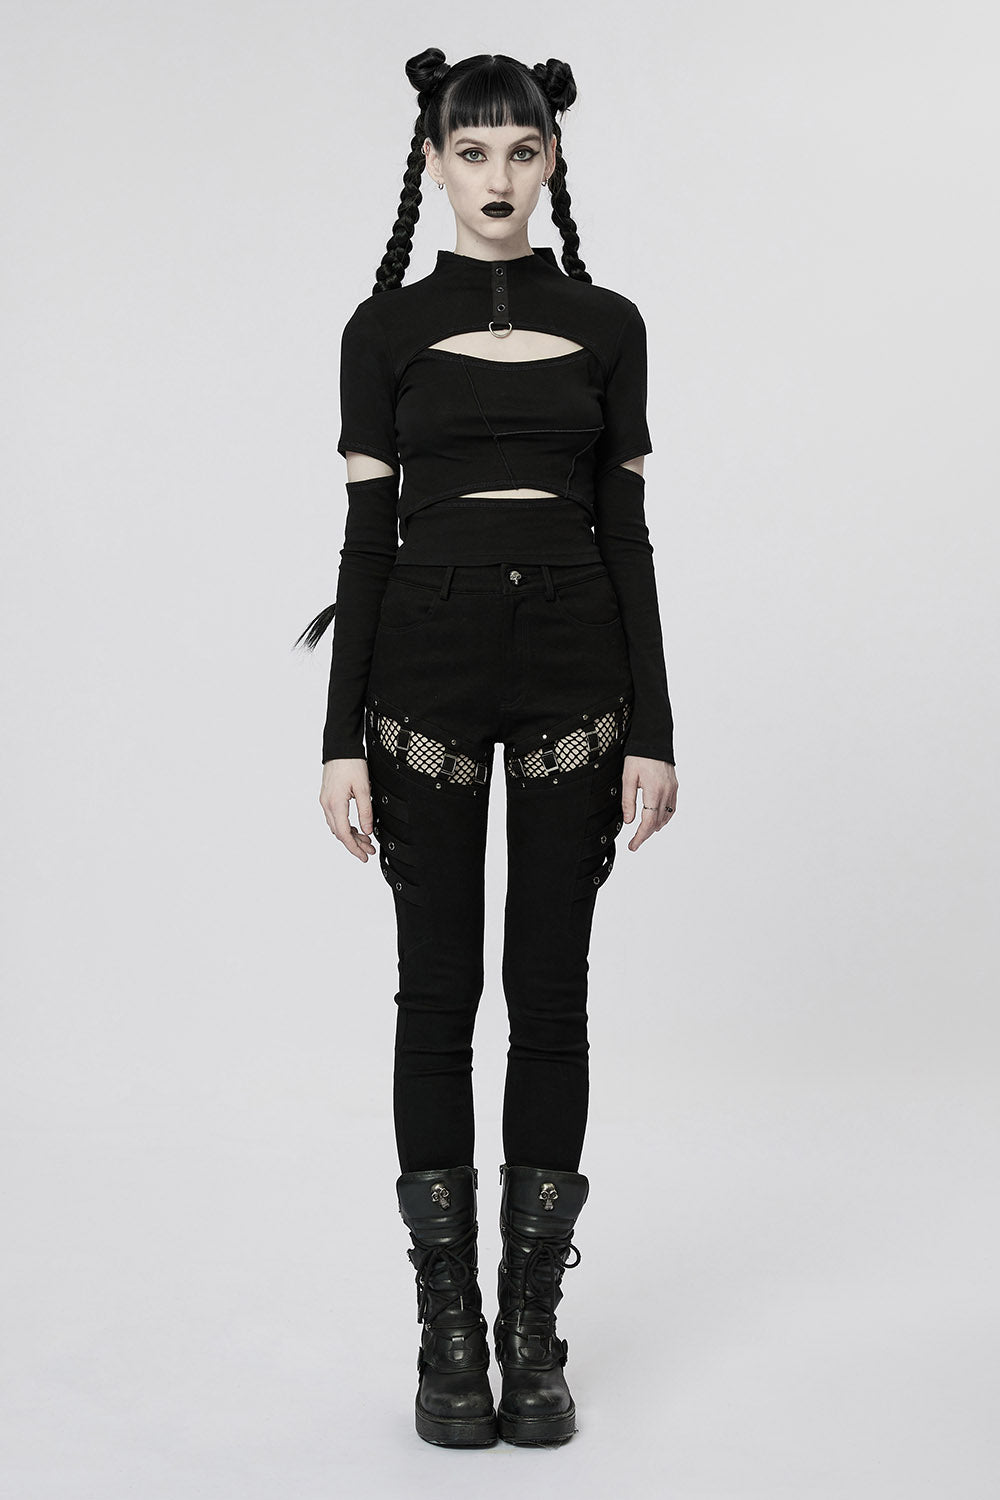 Doll Stitches Hollow-Out Top[BLACK]